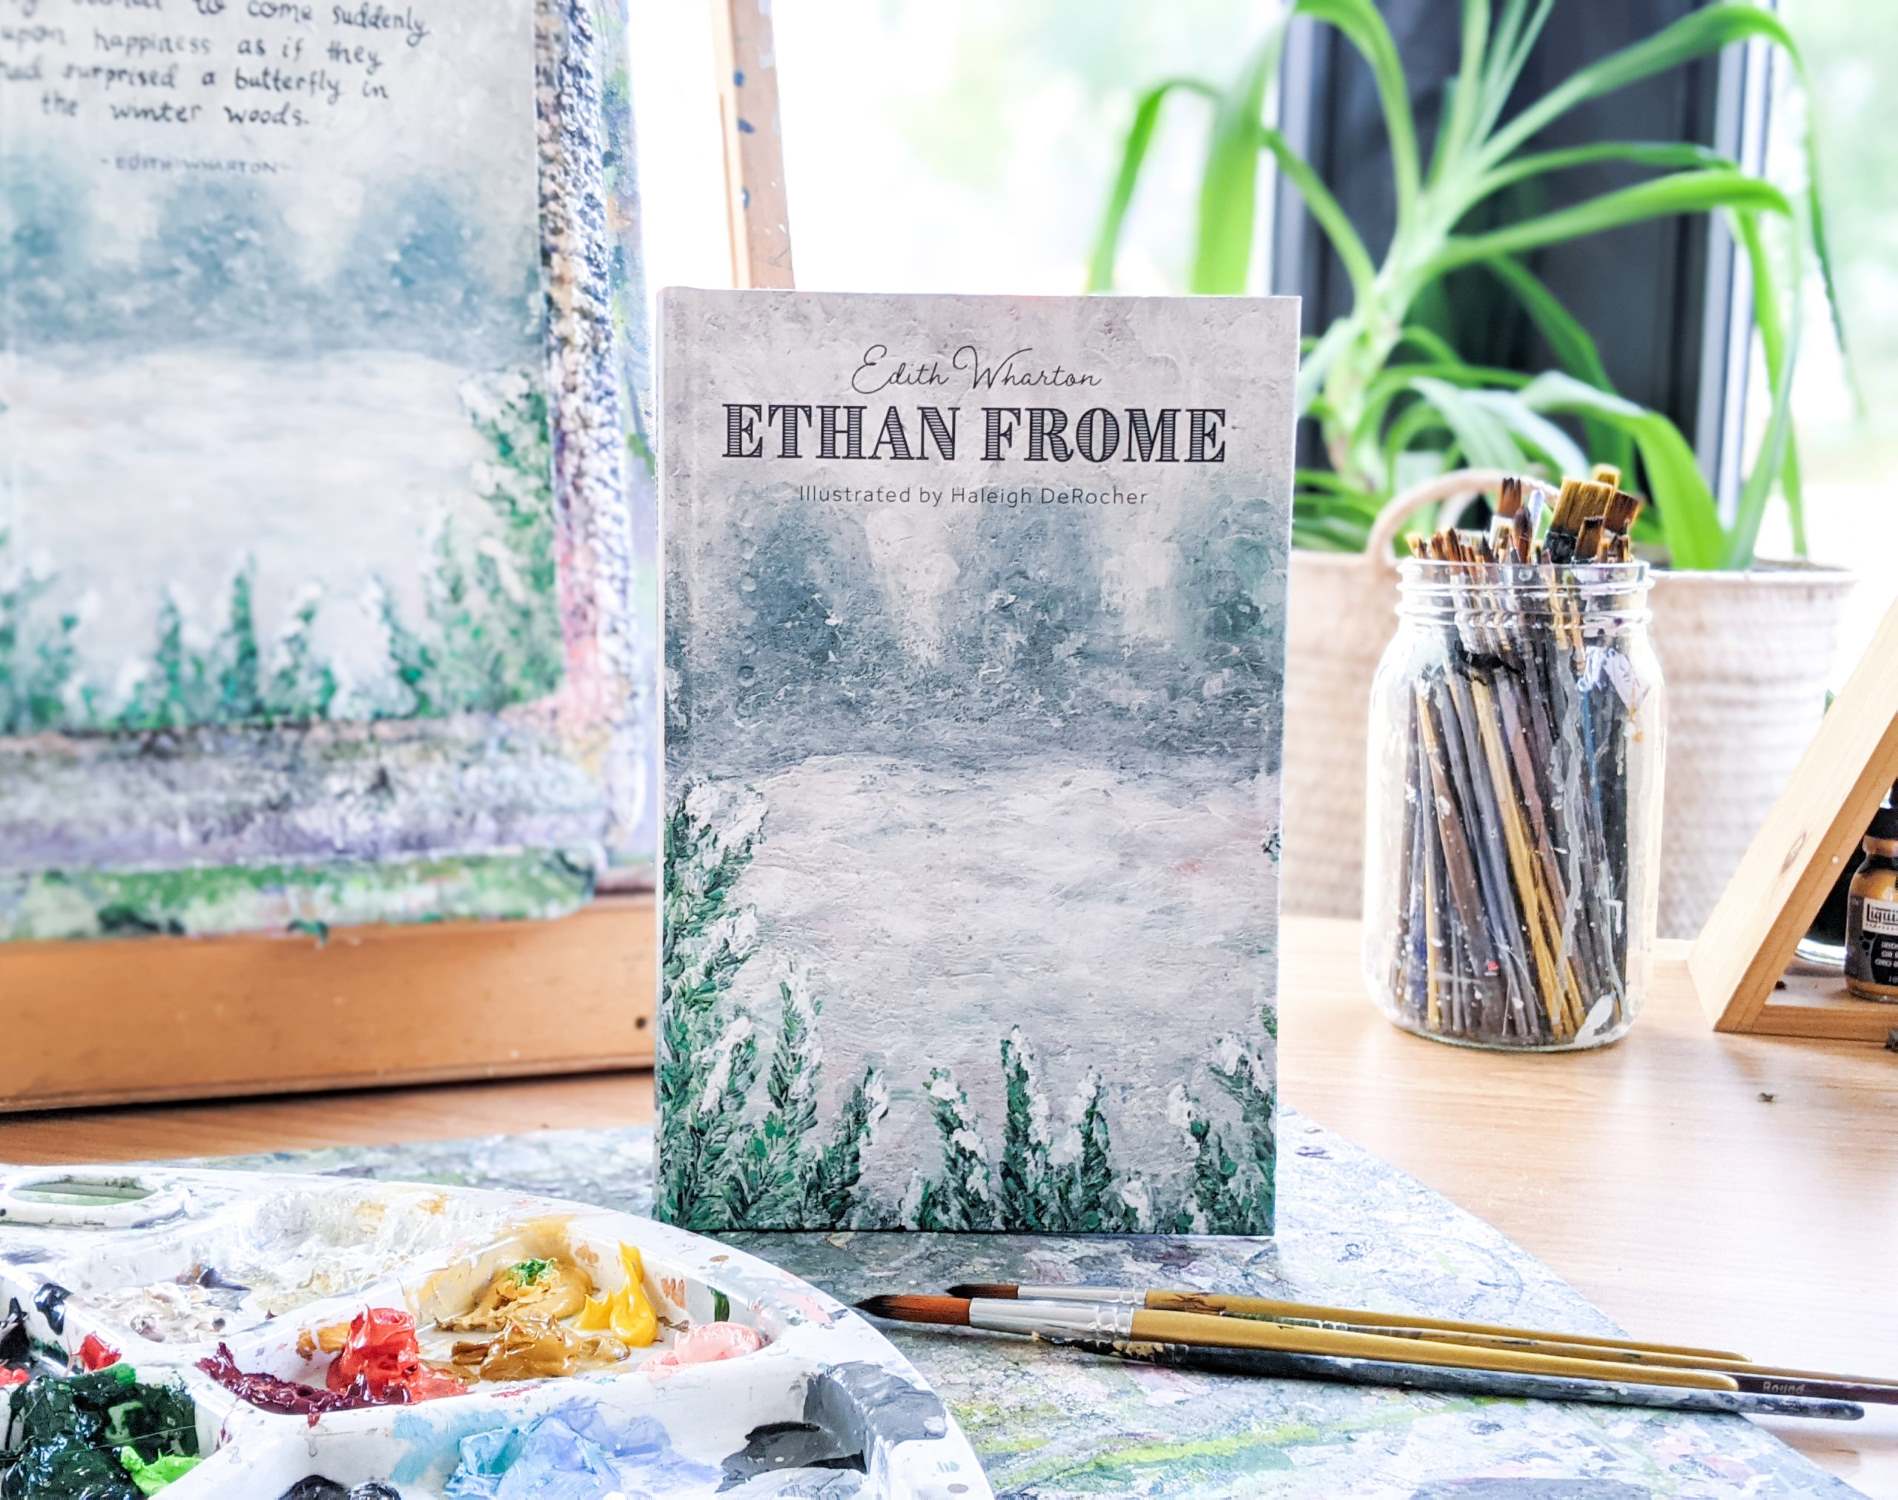 18-surprising-facts-about-ethan-frome-edith-wharton